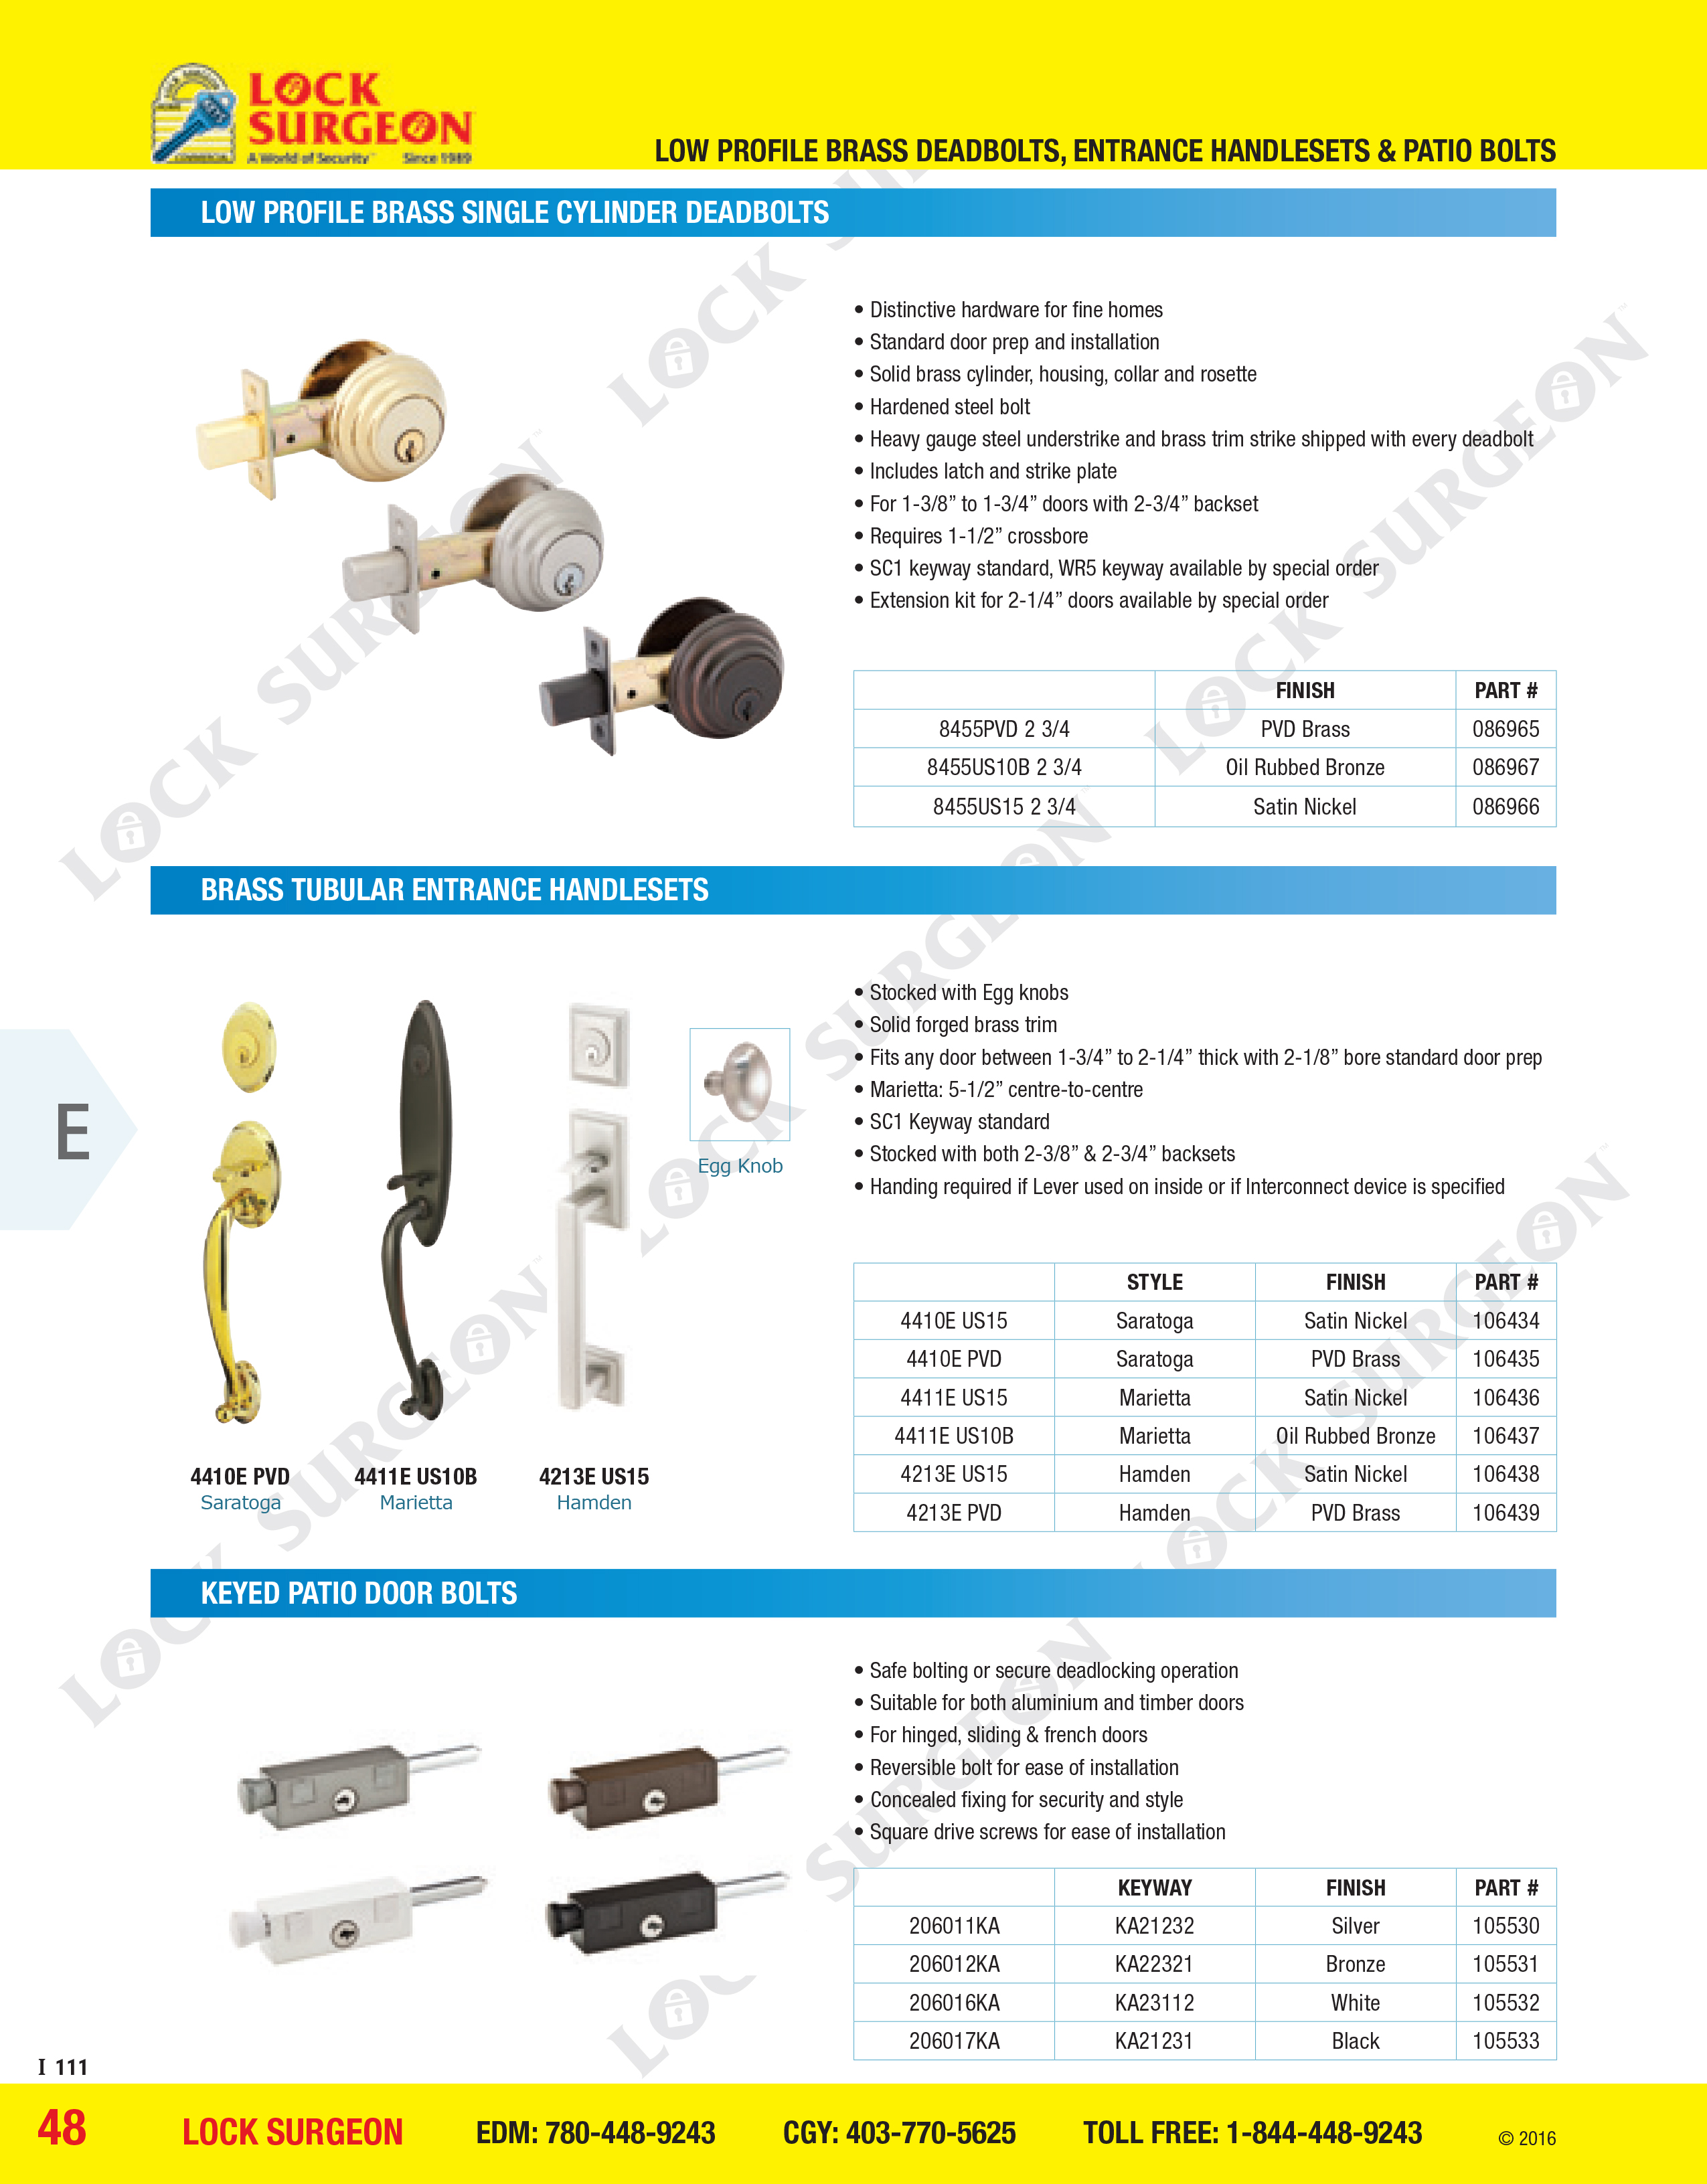 Residential Schlage deadbolts and grip-sets and patio door locking bolts Acheson.